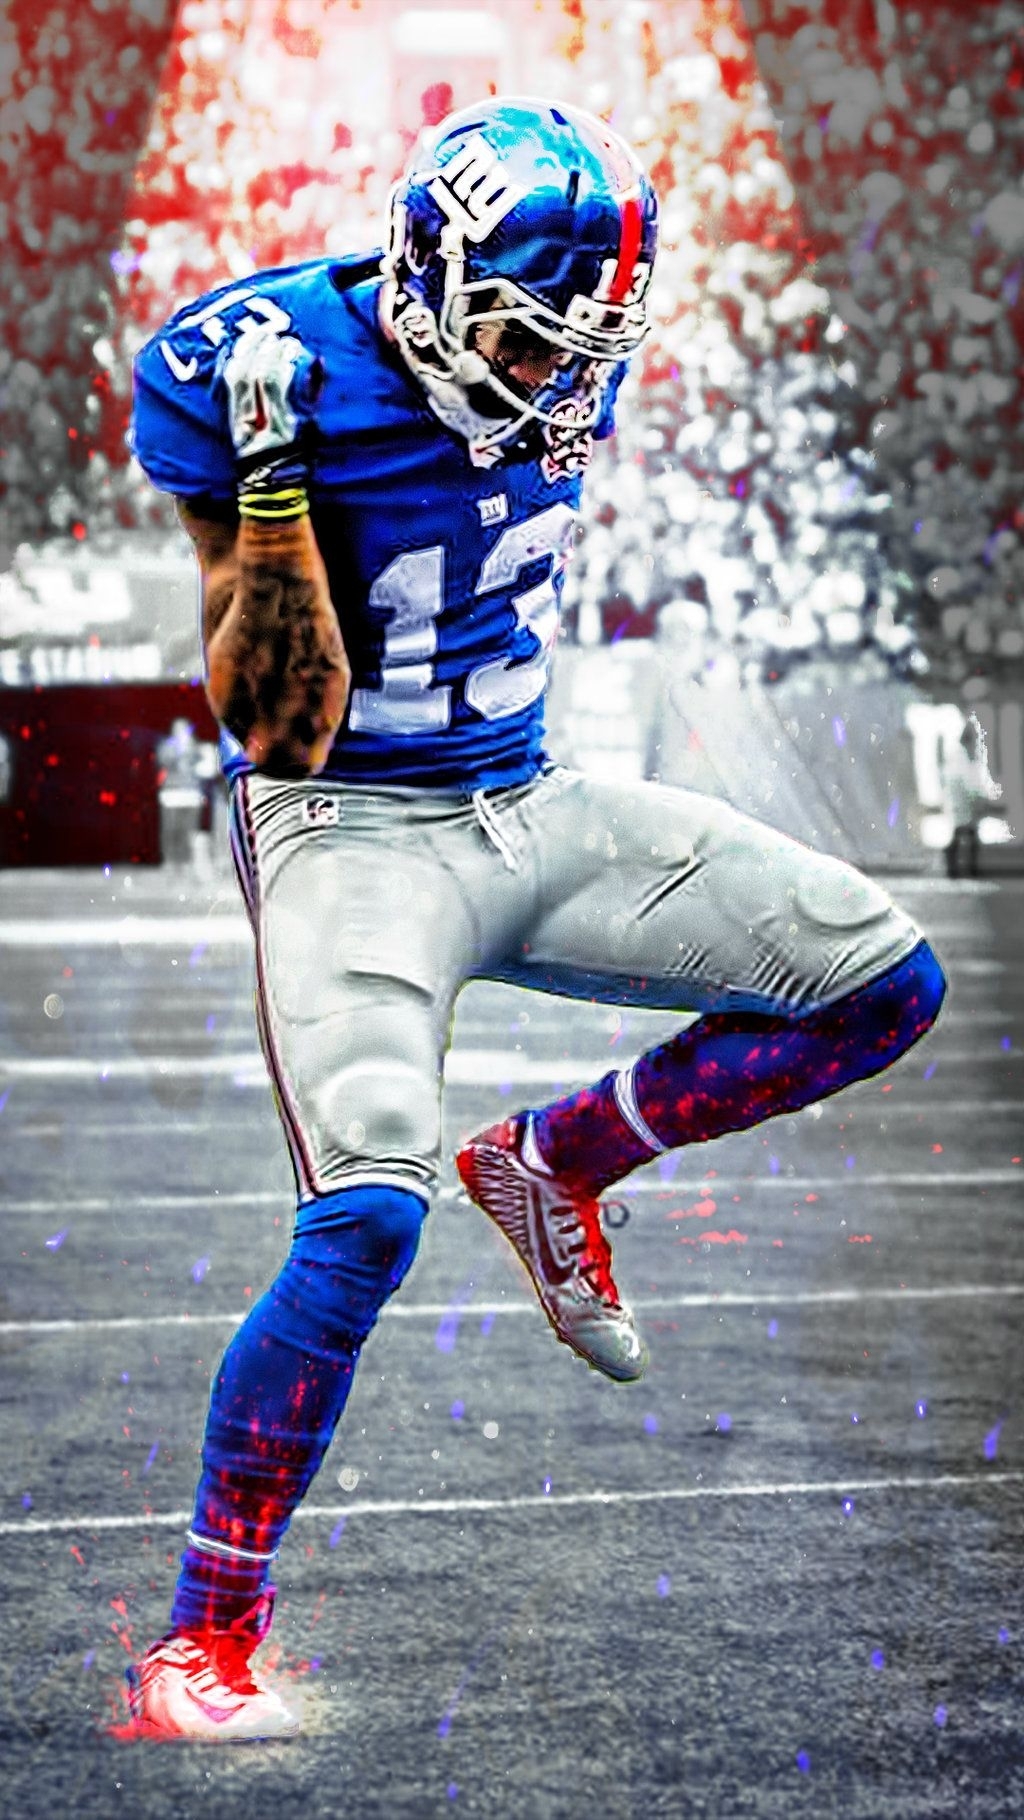 10 Top Odell Beckham Jr Iphone Wallpaper FULL HD 1080p For PC Background